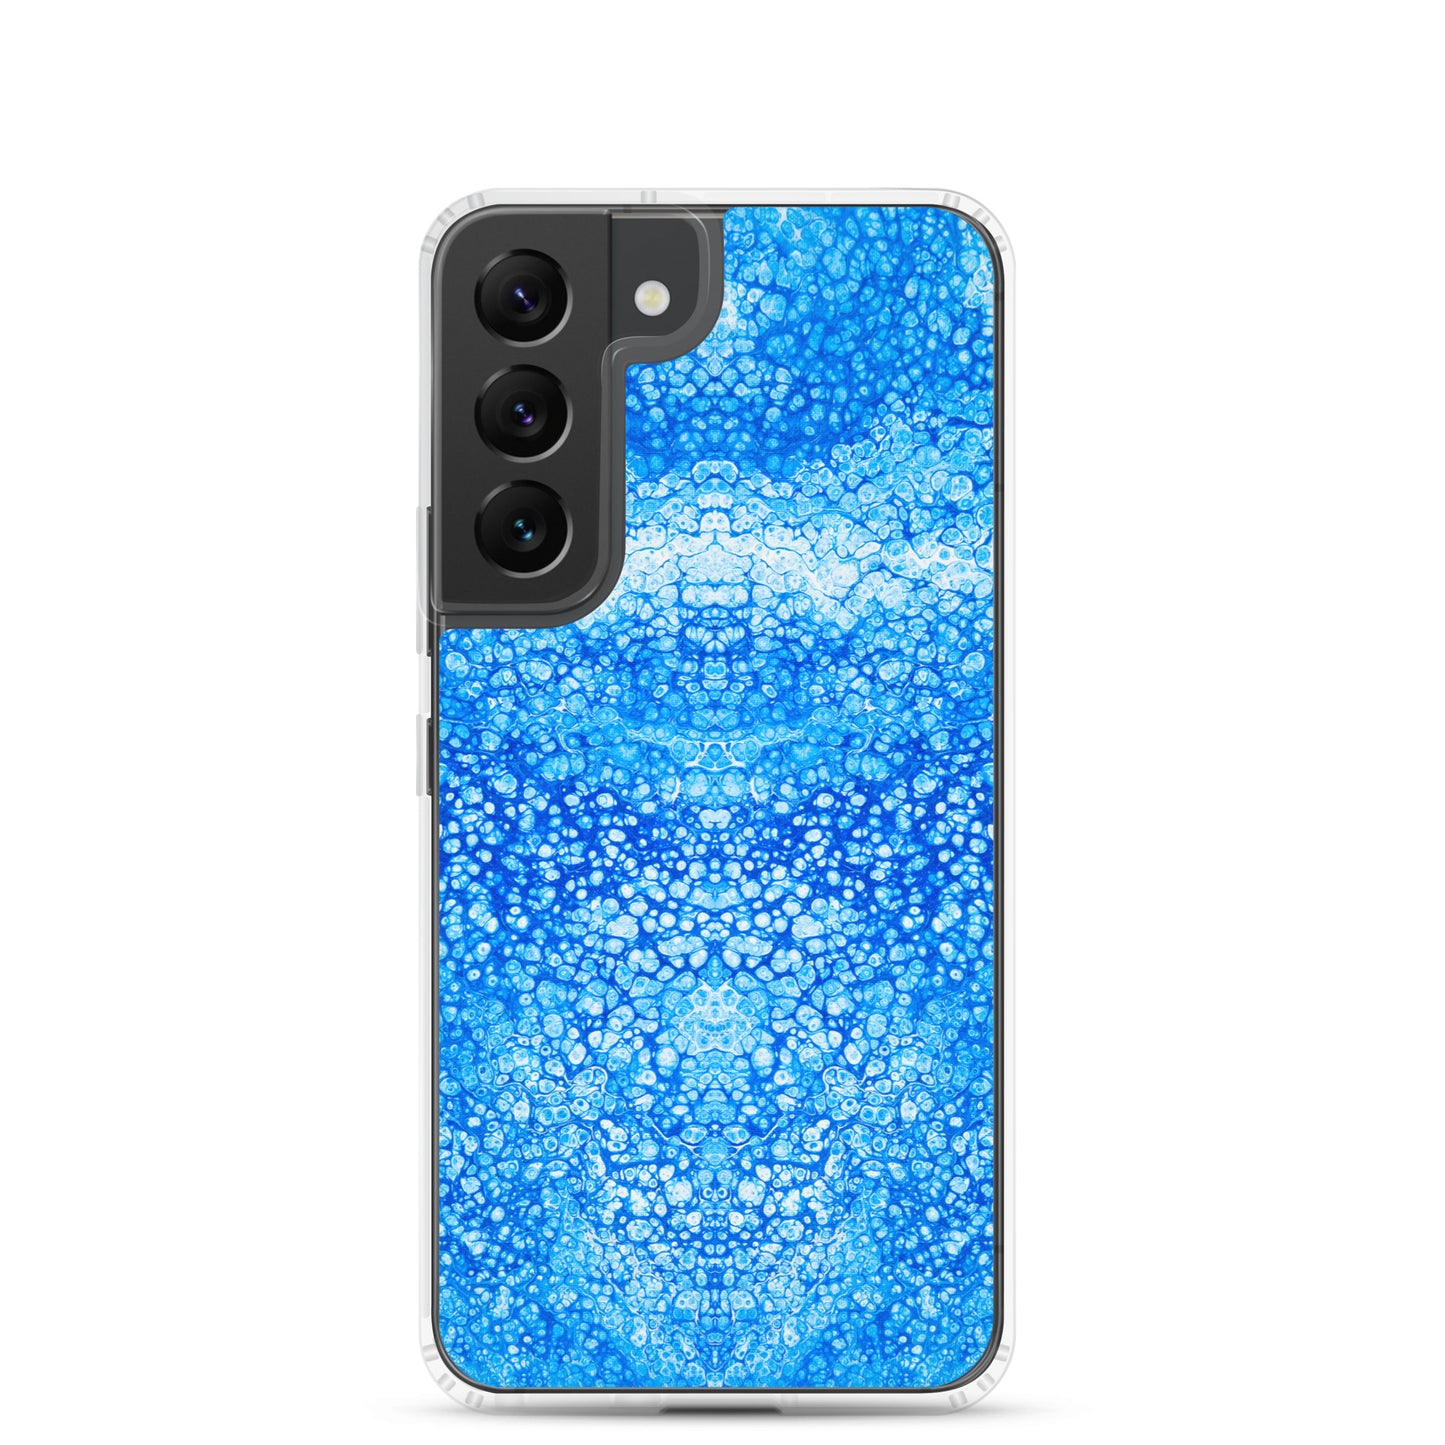 NightOwl Studio Custom Phone Case Compatible with Samsung Galaxy, Slim Cover for Wireless Charging, Drop and Scratch Resistant, Cryptic Blue